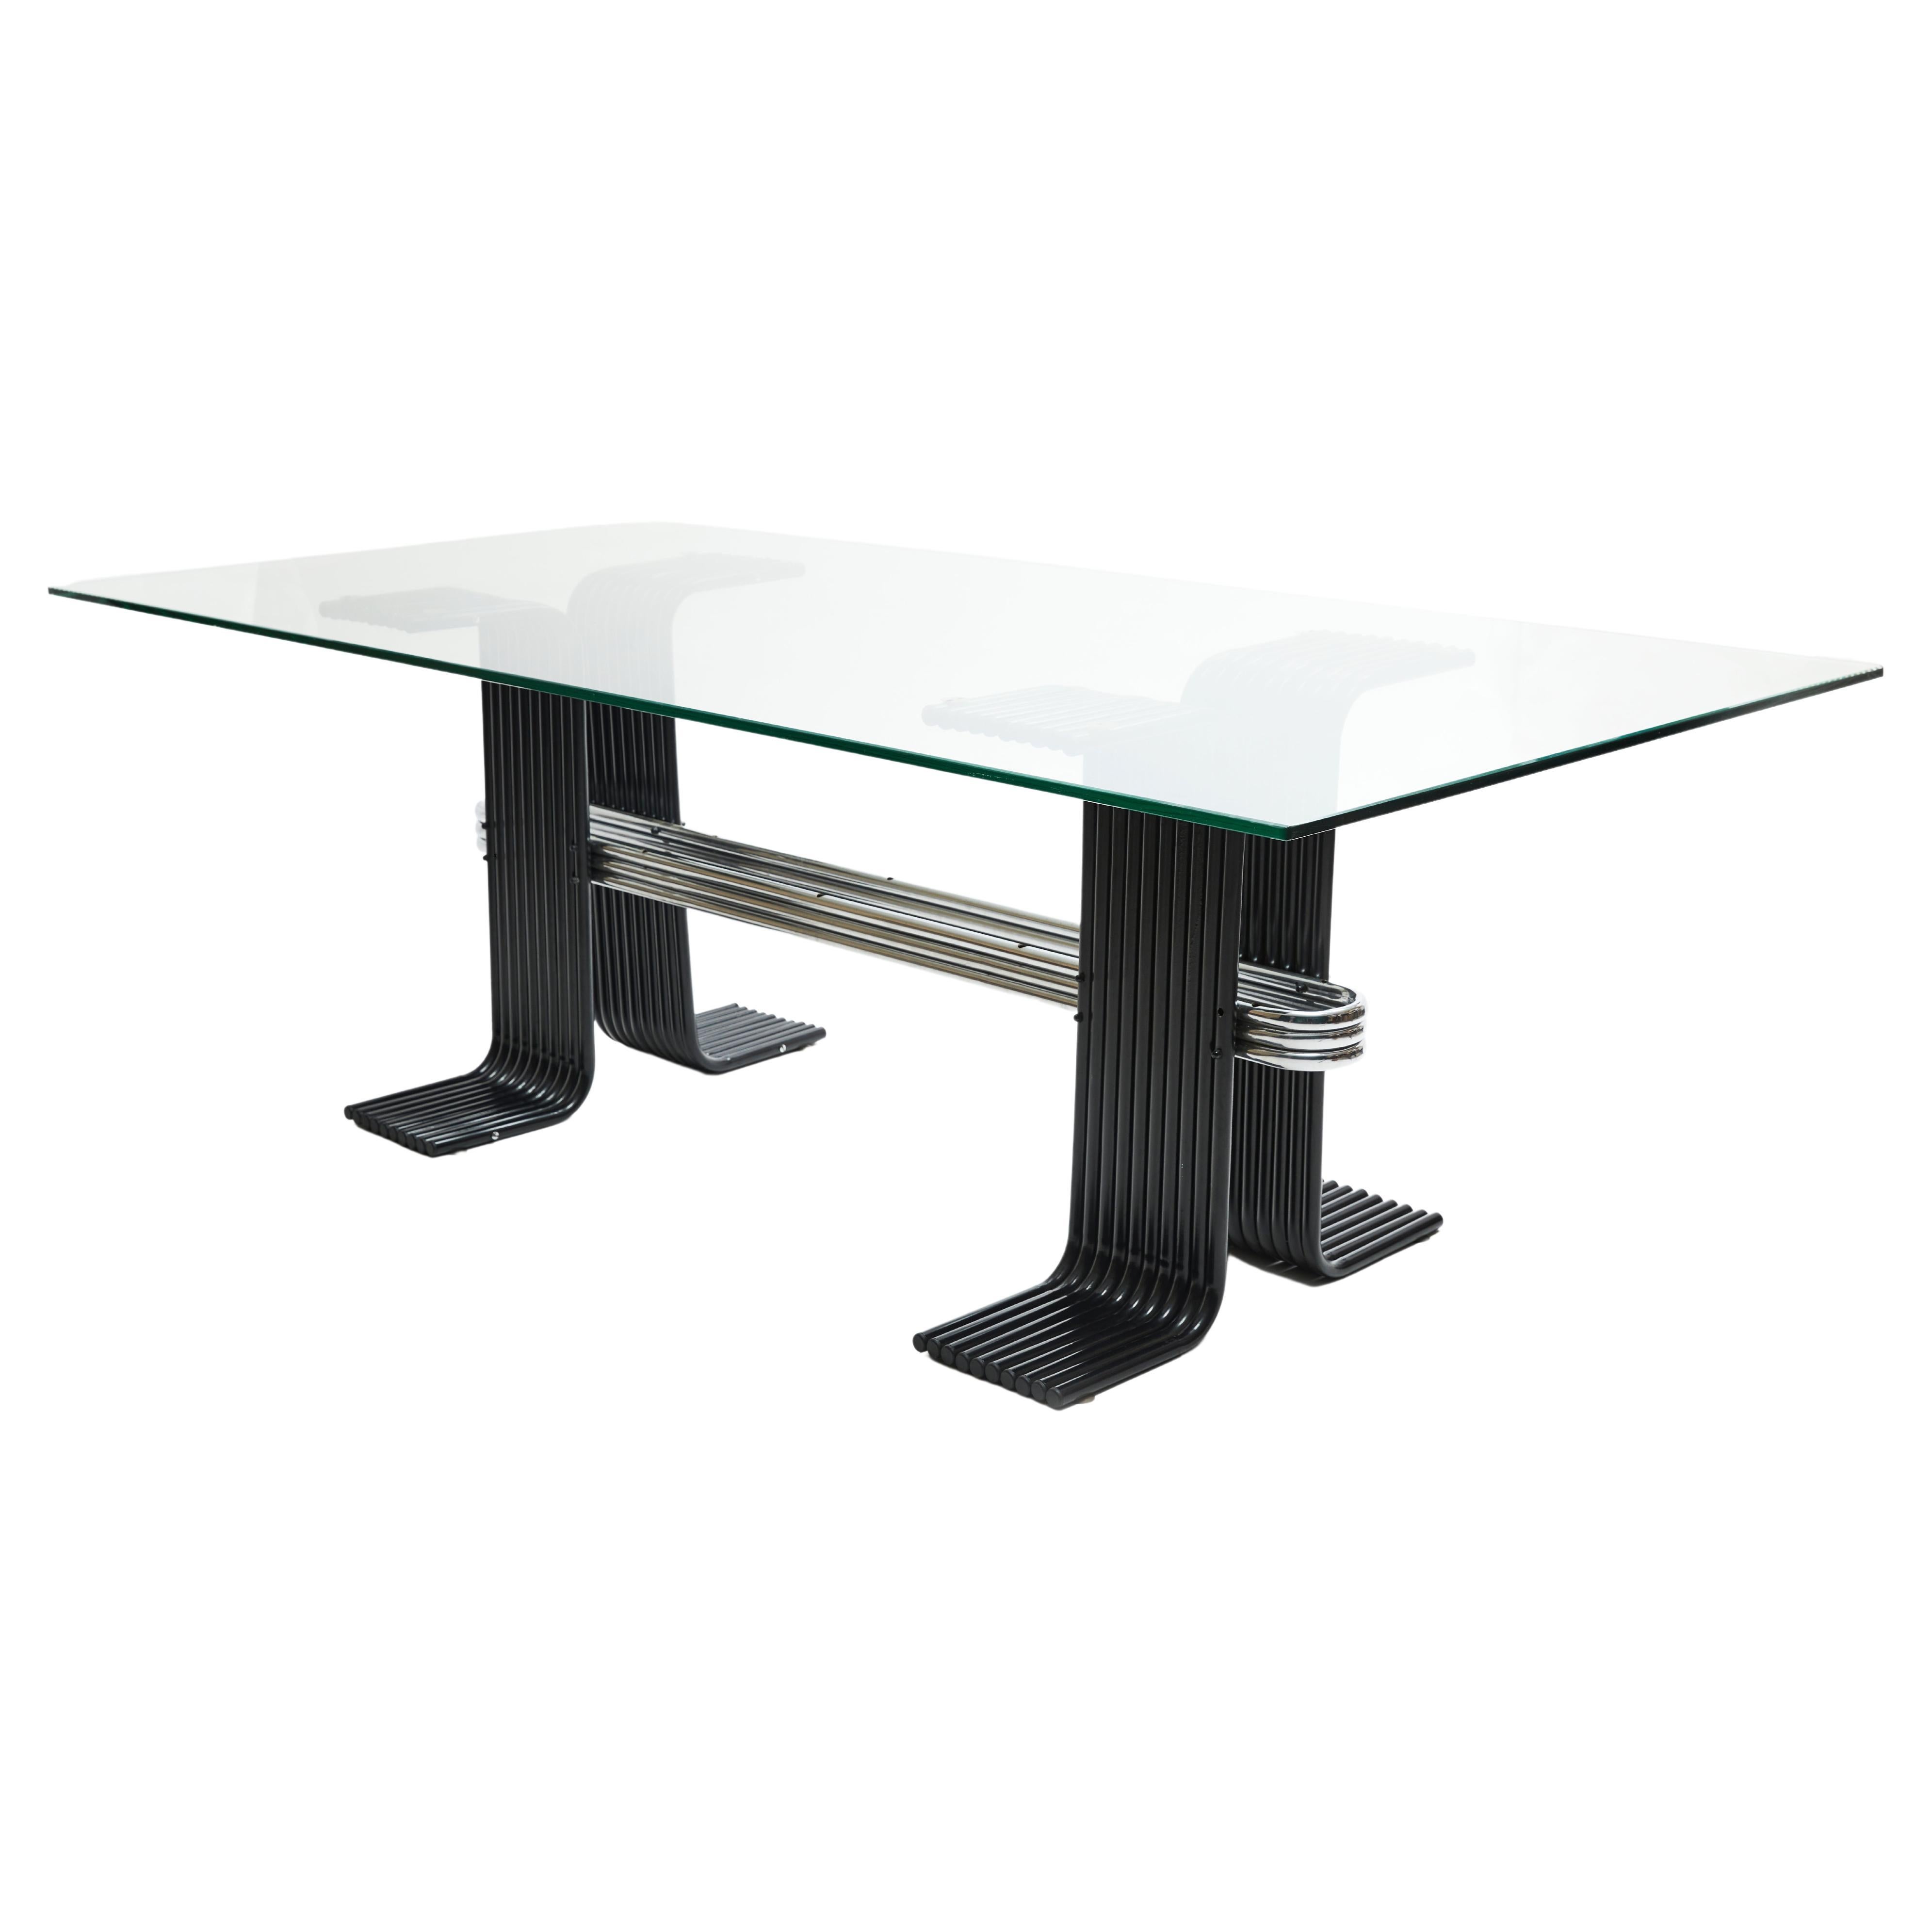 Brazilian Modern Dining Table in Black Painted Iron, Chrome & Glass, Forma, 1970 For Sale